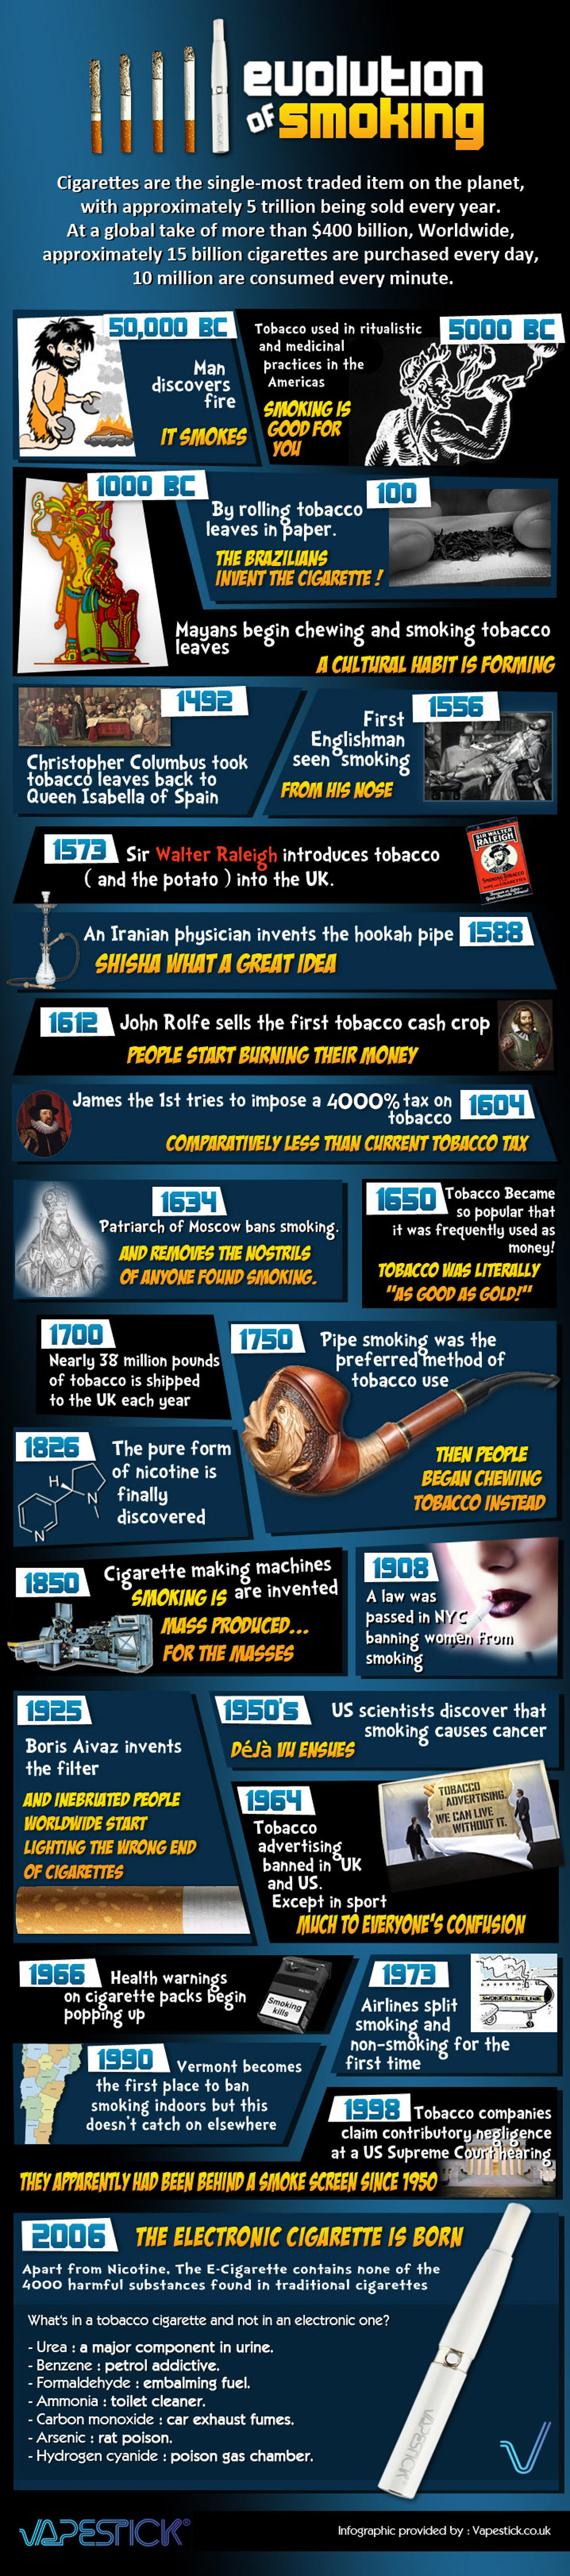 Evolution of Smoking from Cigarettes to the Electronic Cigarette Infographic